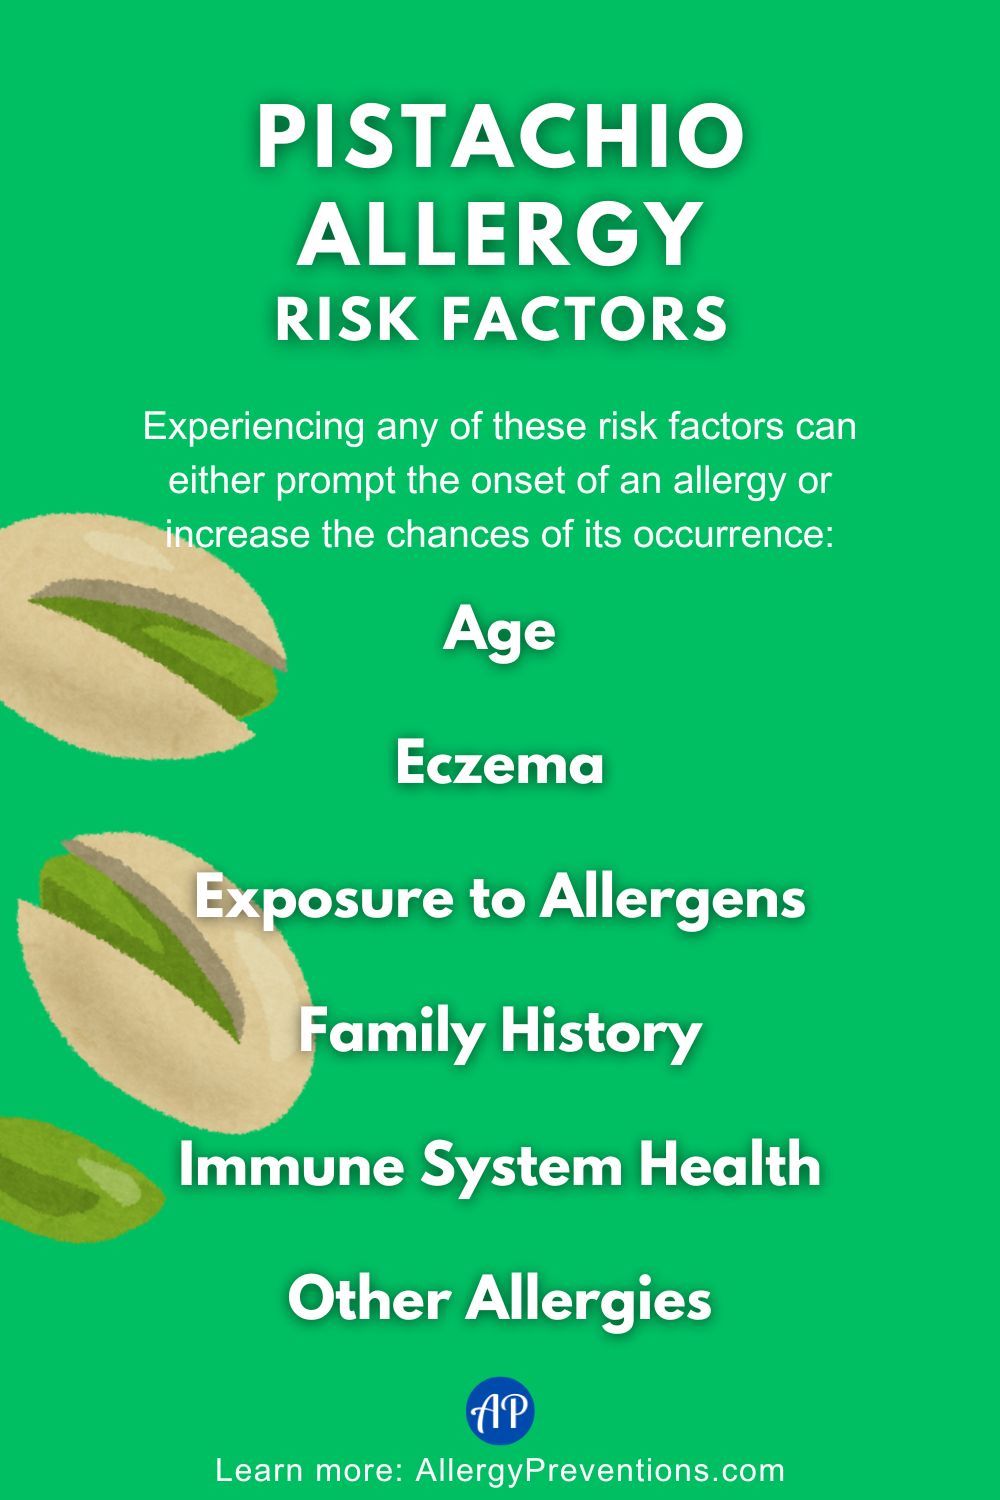 Pistachio allergy Risk Factors Infographic. Experiencing any of these risk factors can either prompt the onset of an allergy or increase the chances of its occurrence: Age, Eczema, Exposure to Allergens, Family History, Immune System Health, and Other Allergies.